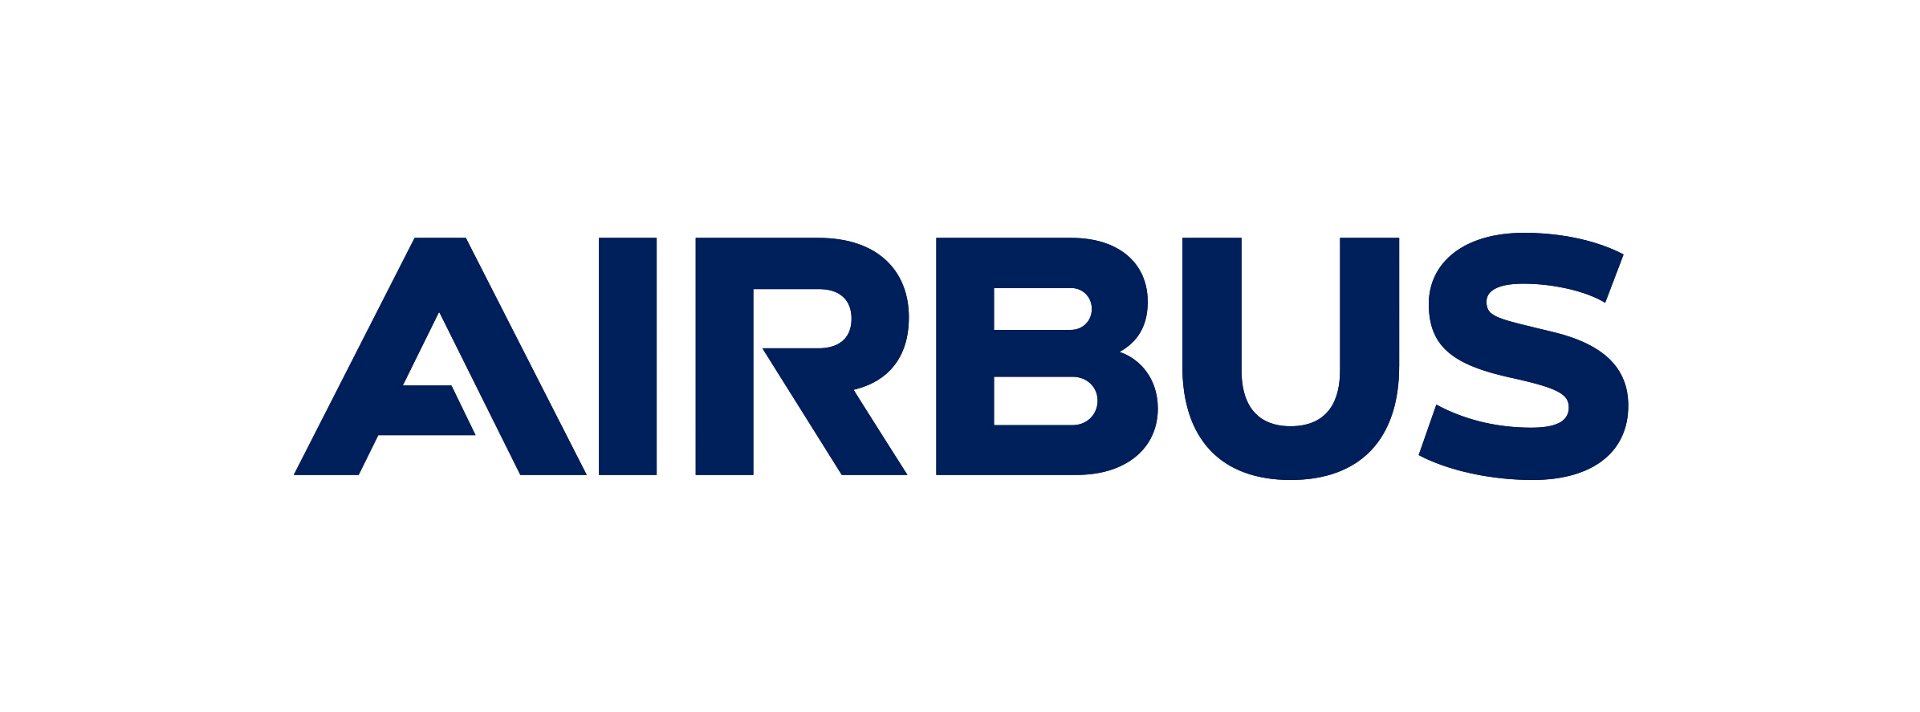 Airbus CyberSecurity